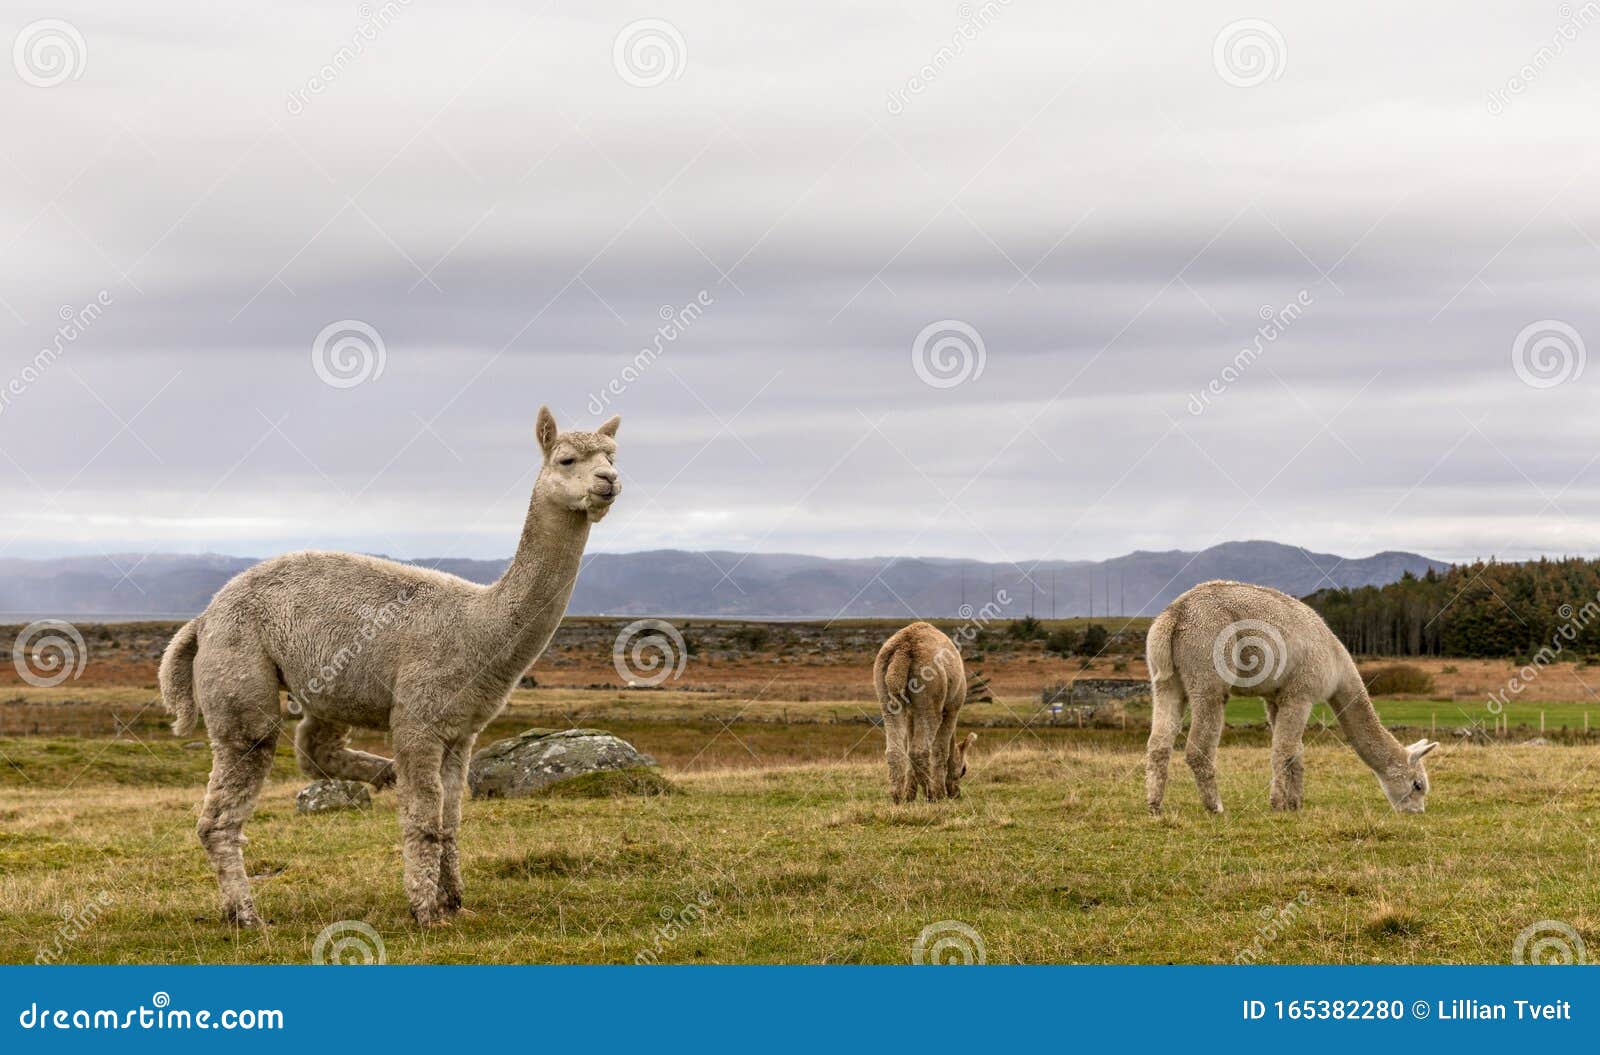 alpacas, vicugna pacos, in the beautiful landscape of lista, norway.